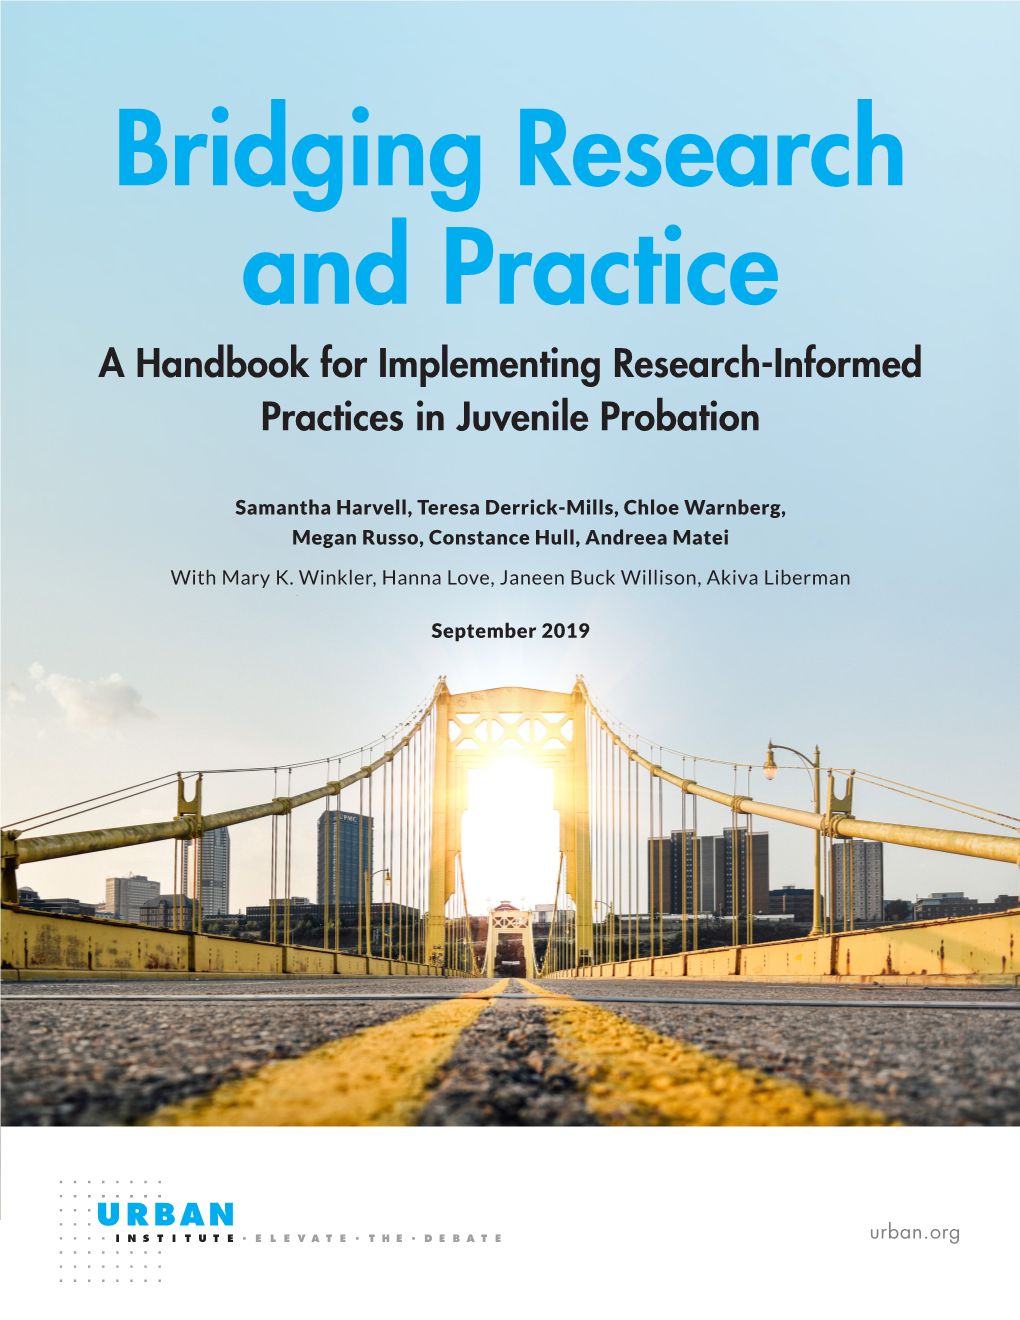 Bridging Research and Practice a Handbook for Implementing Research-Informed Practices in Juvenile Probation